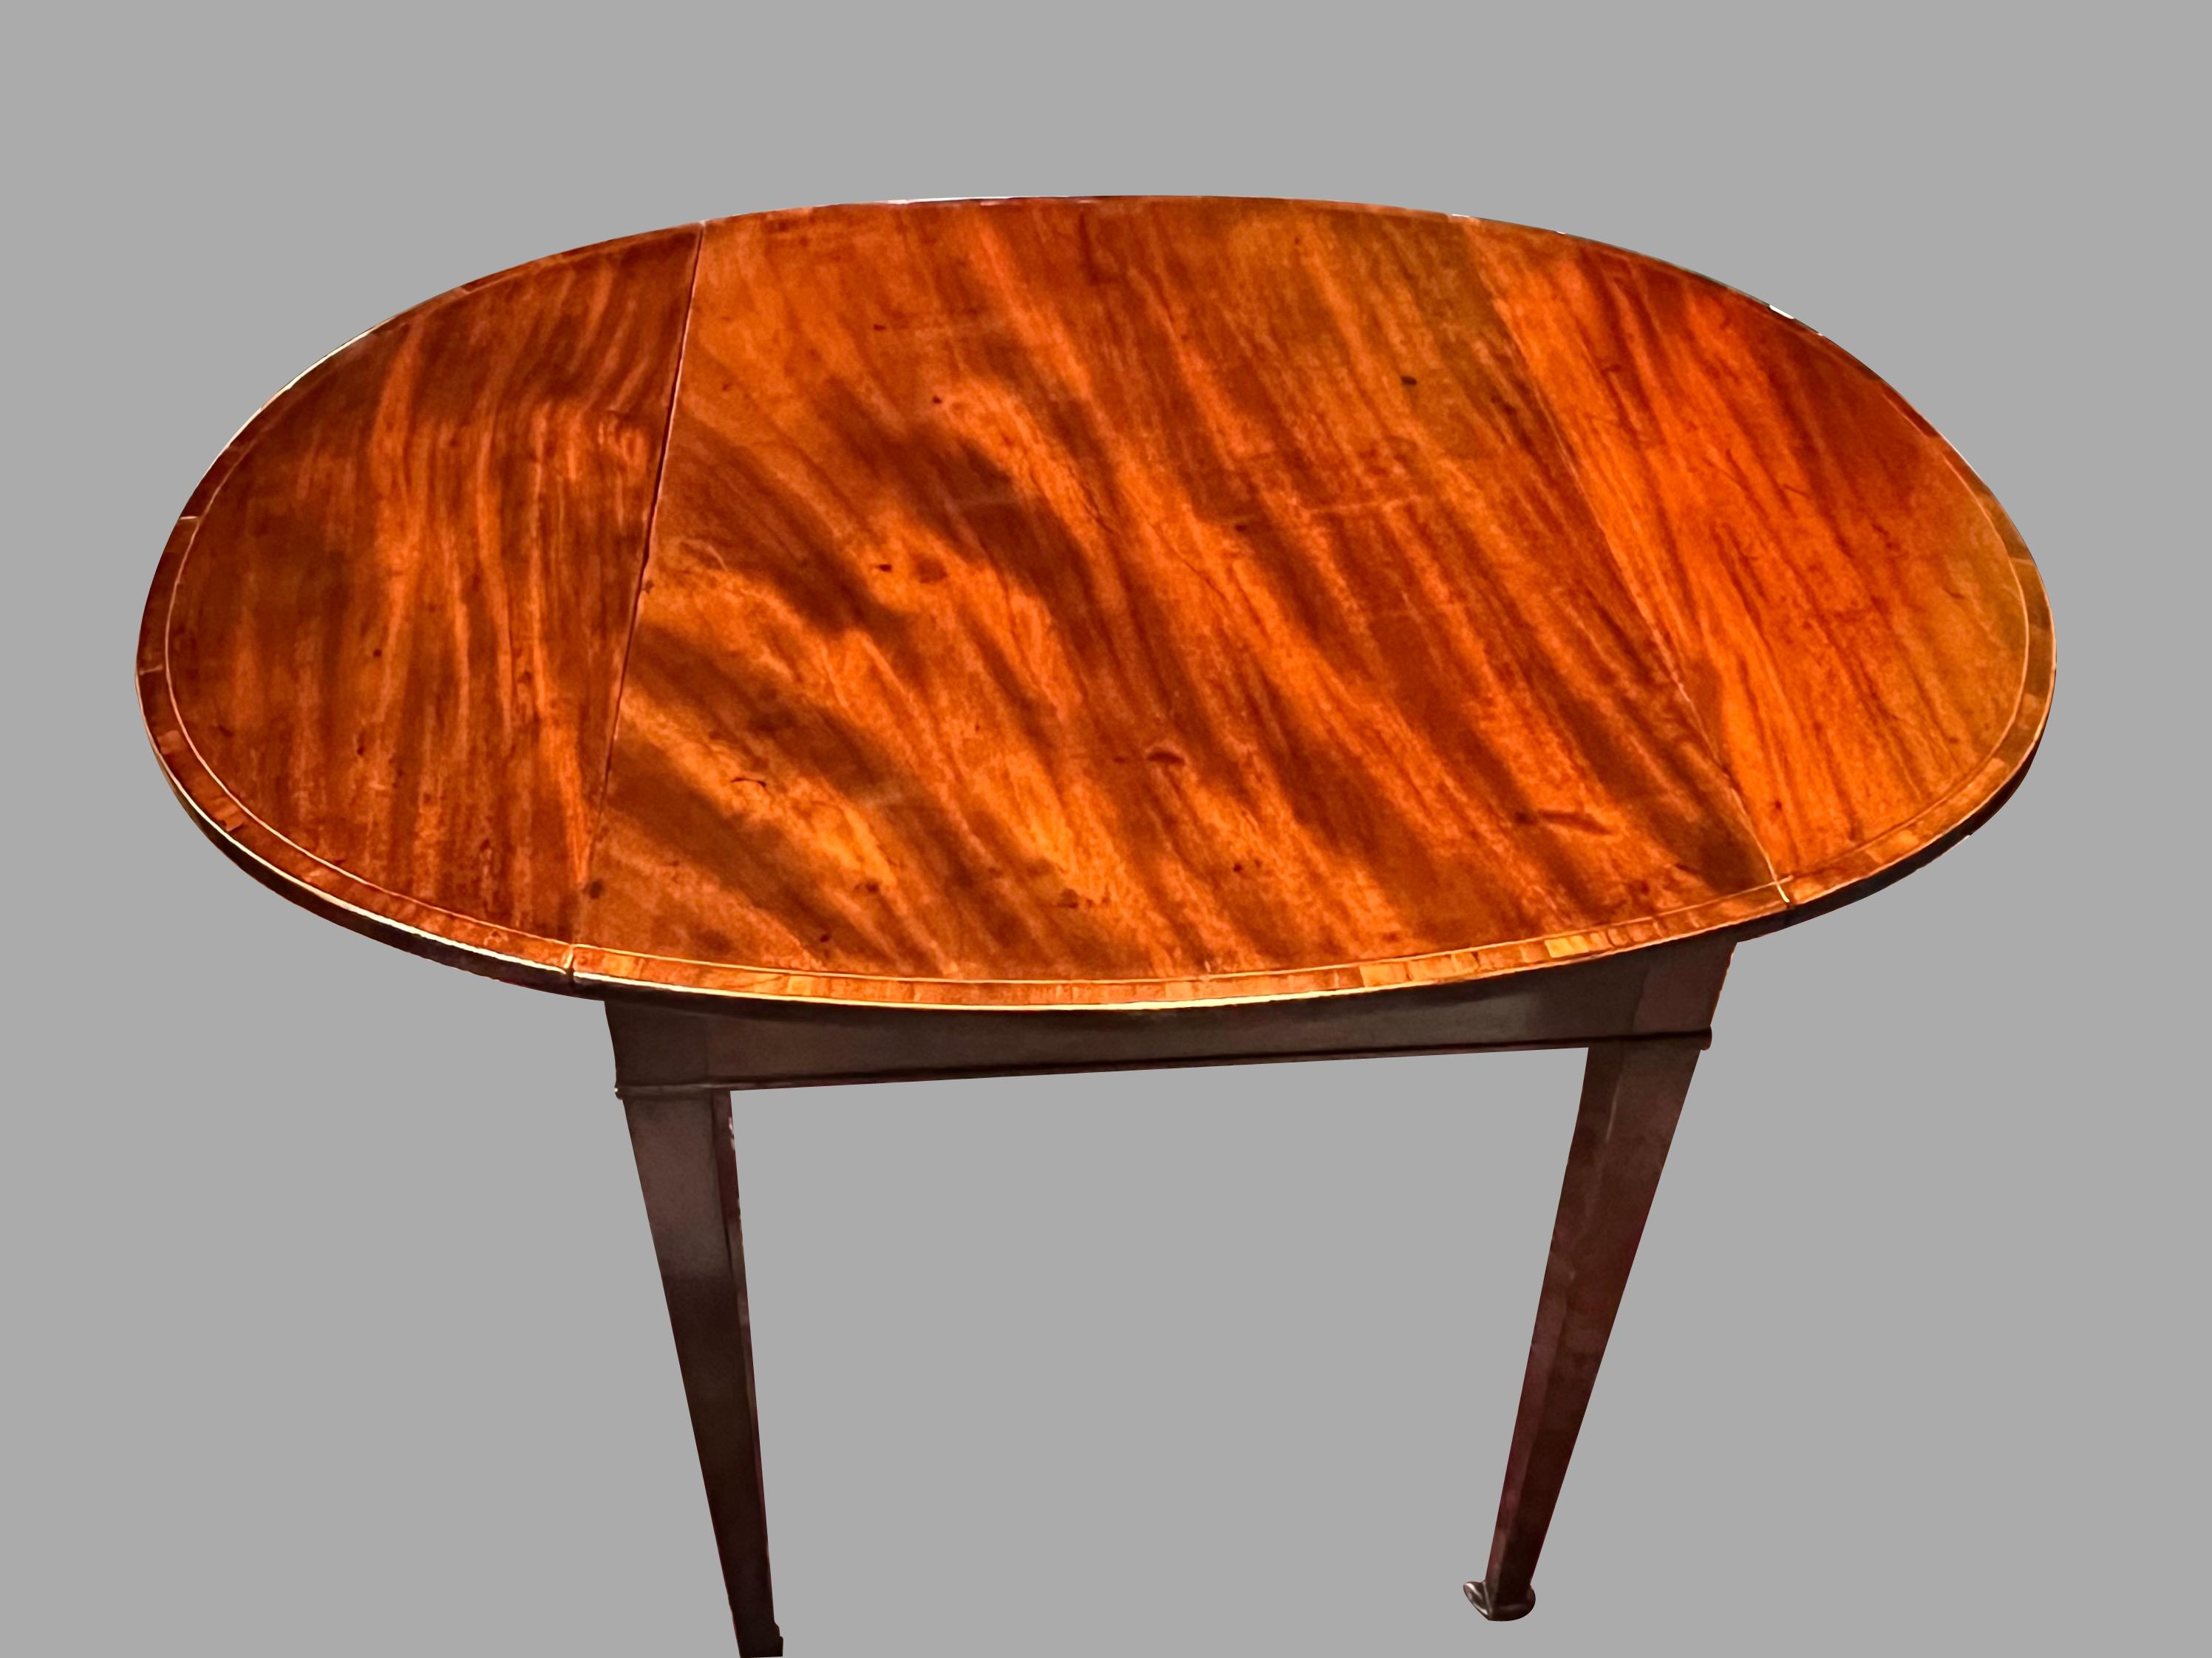 Fine English Inlaid Mahogany Hepplewhite Period Pembroke Table with Drawer For Sale 3